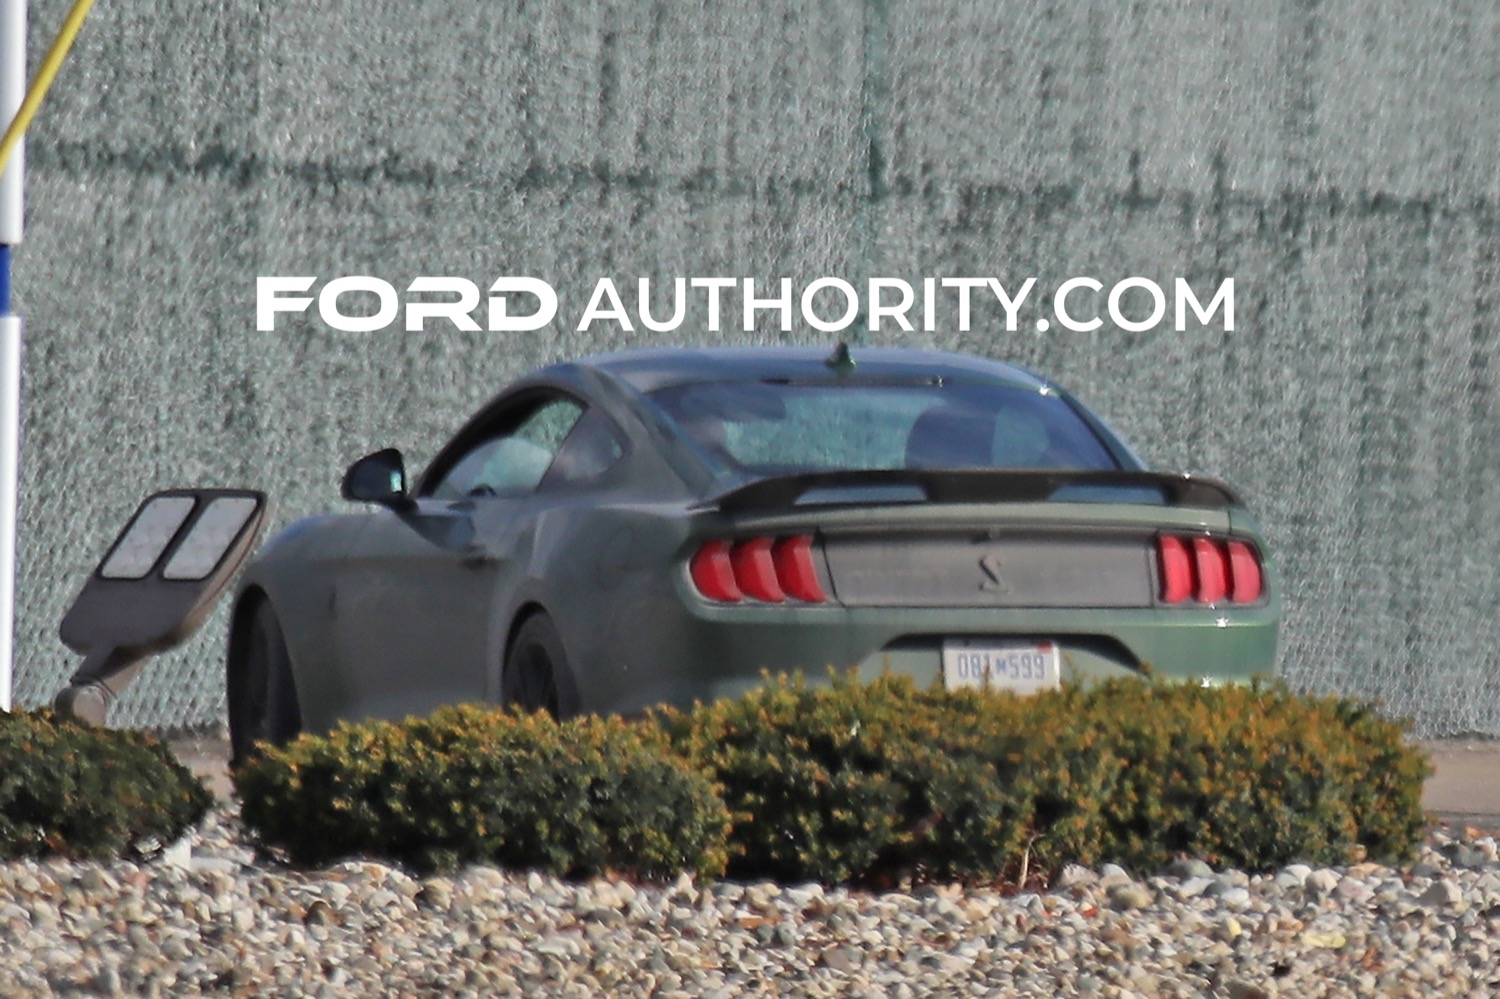 2022-Ford-Mustang-Shelby-GT500-Eruption-Green-002-First-Real-World-Pictures.jpg